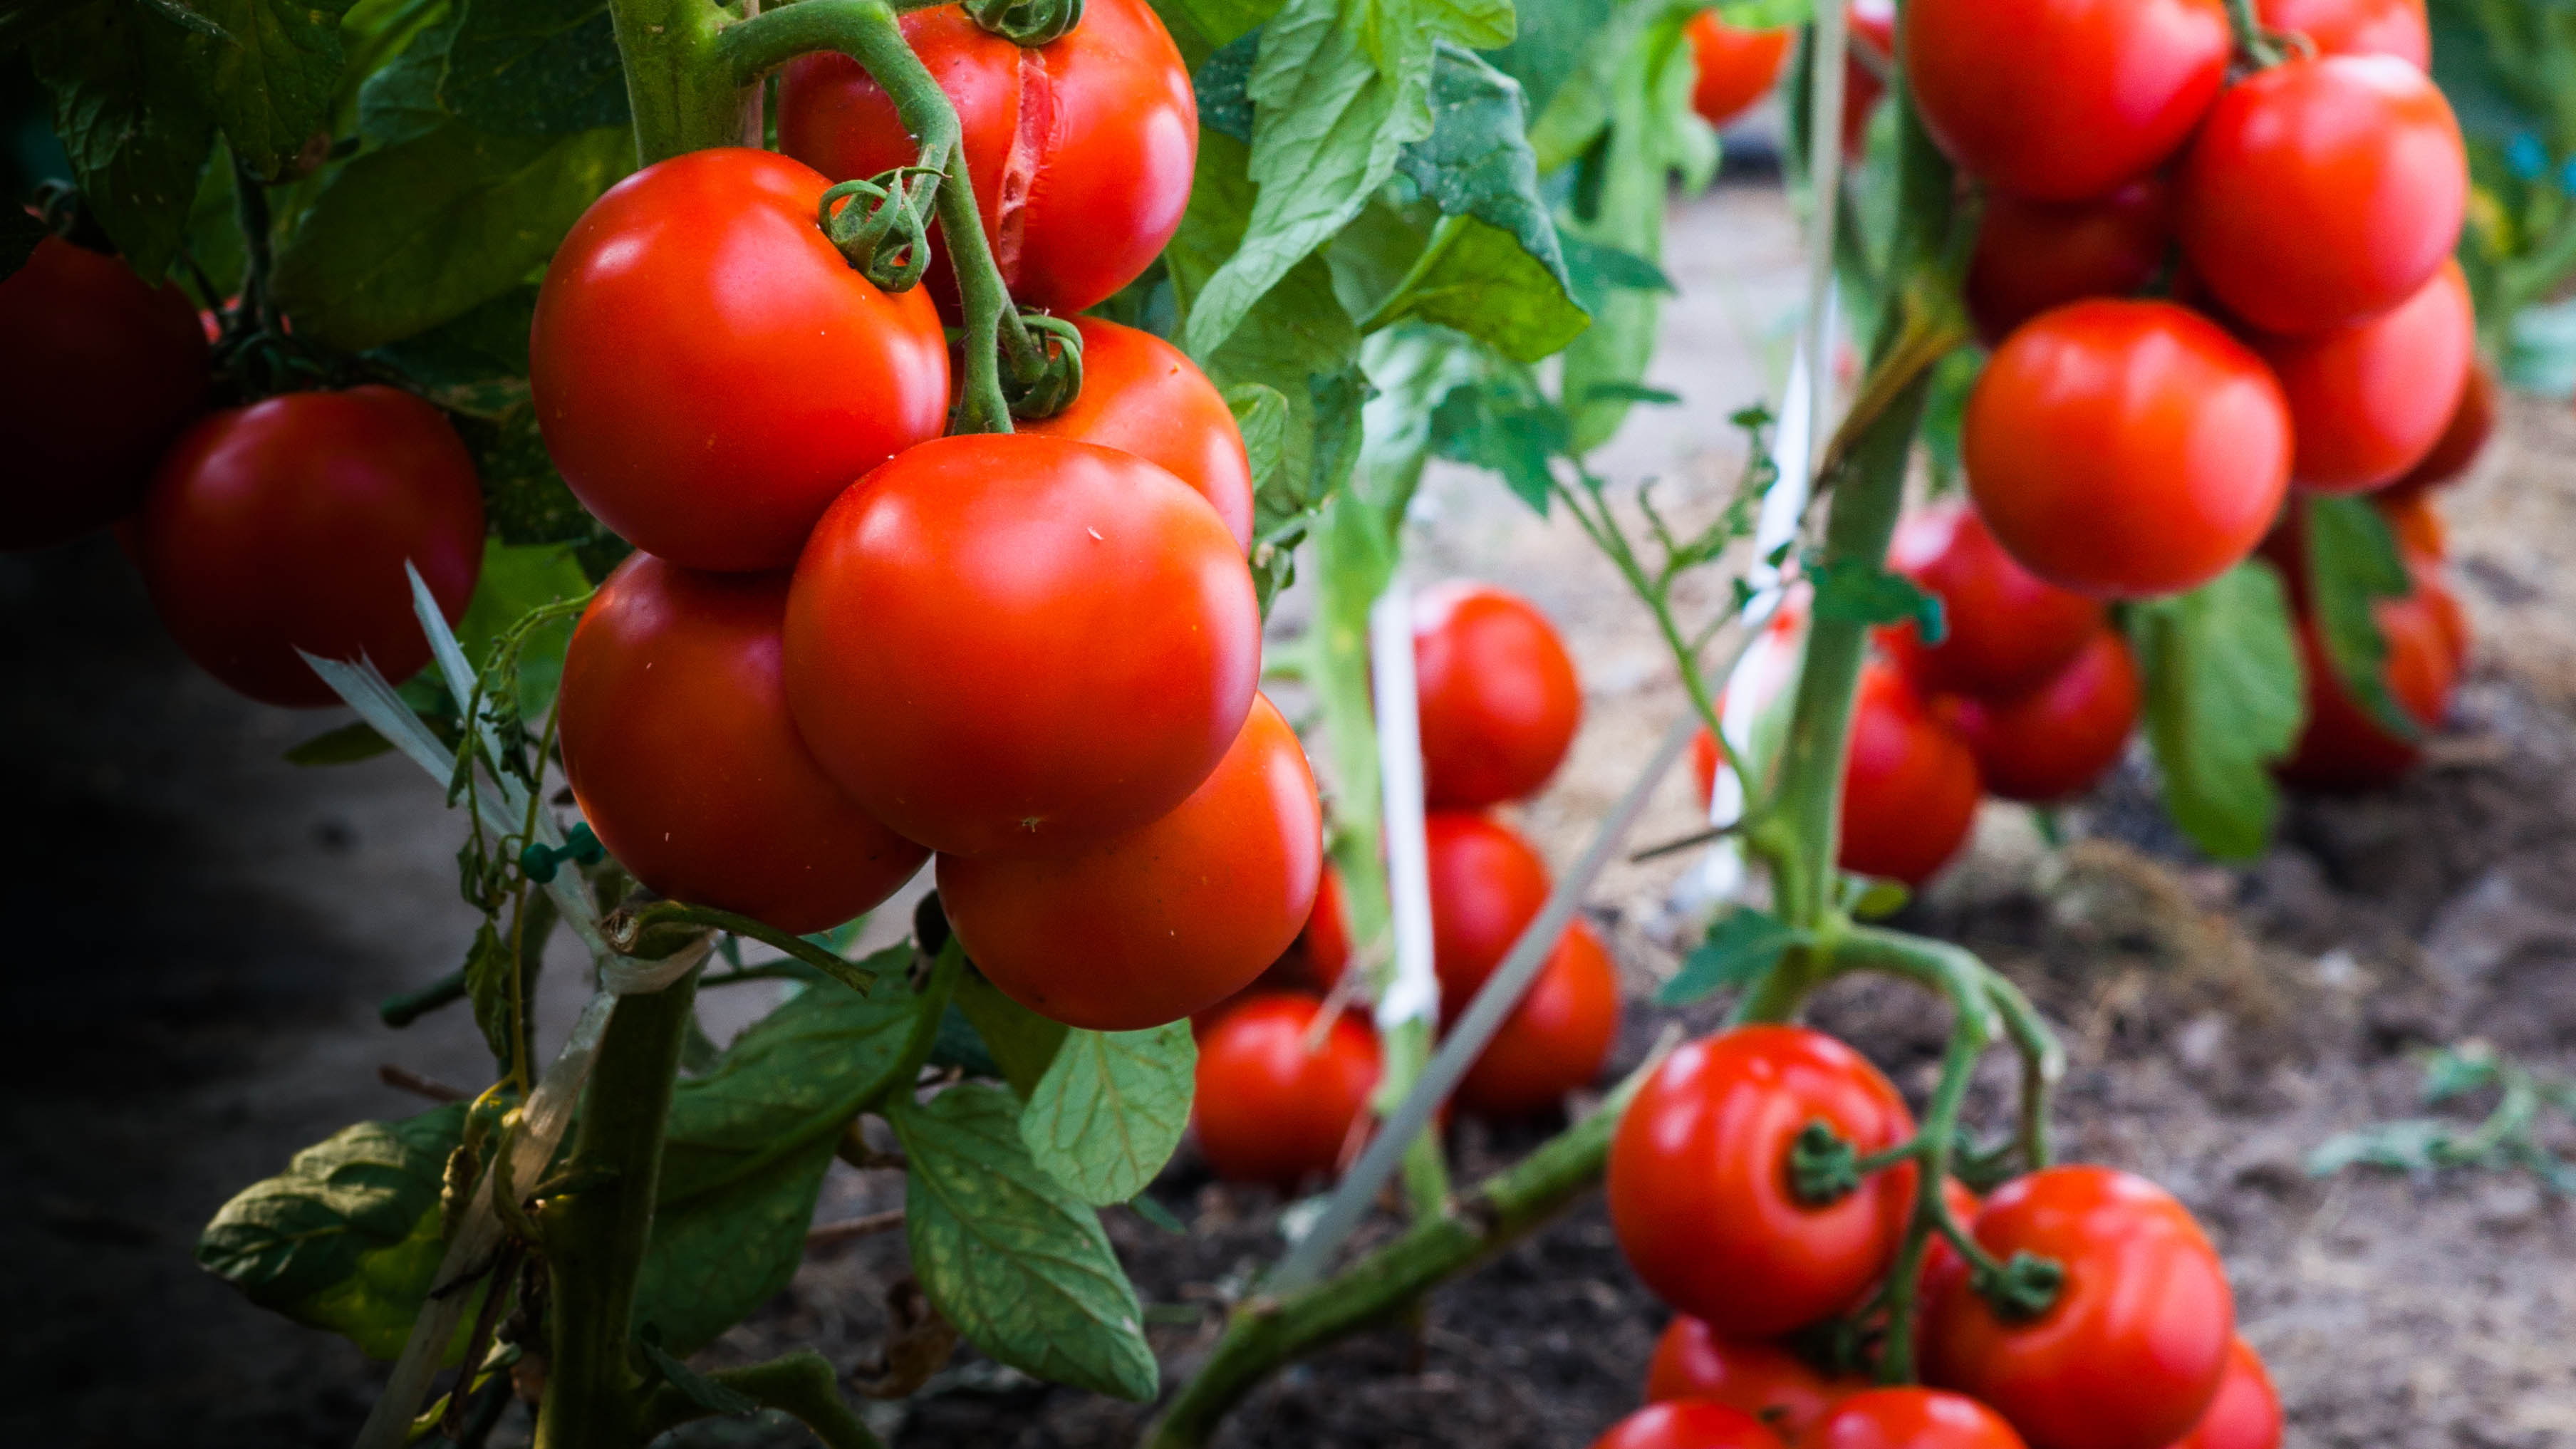 How To Keep Tomato Plants Producing - 5 Tips To More Tomatoes!